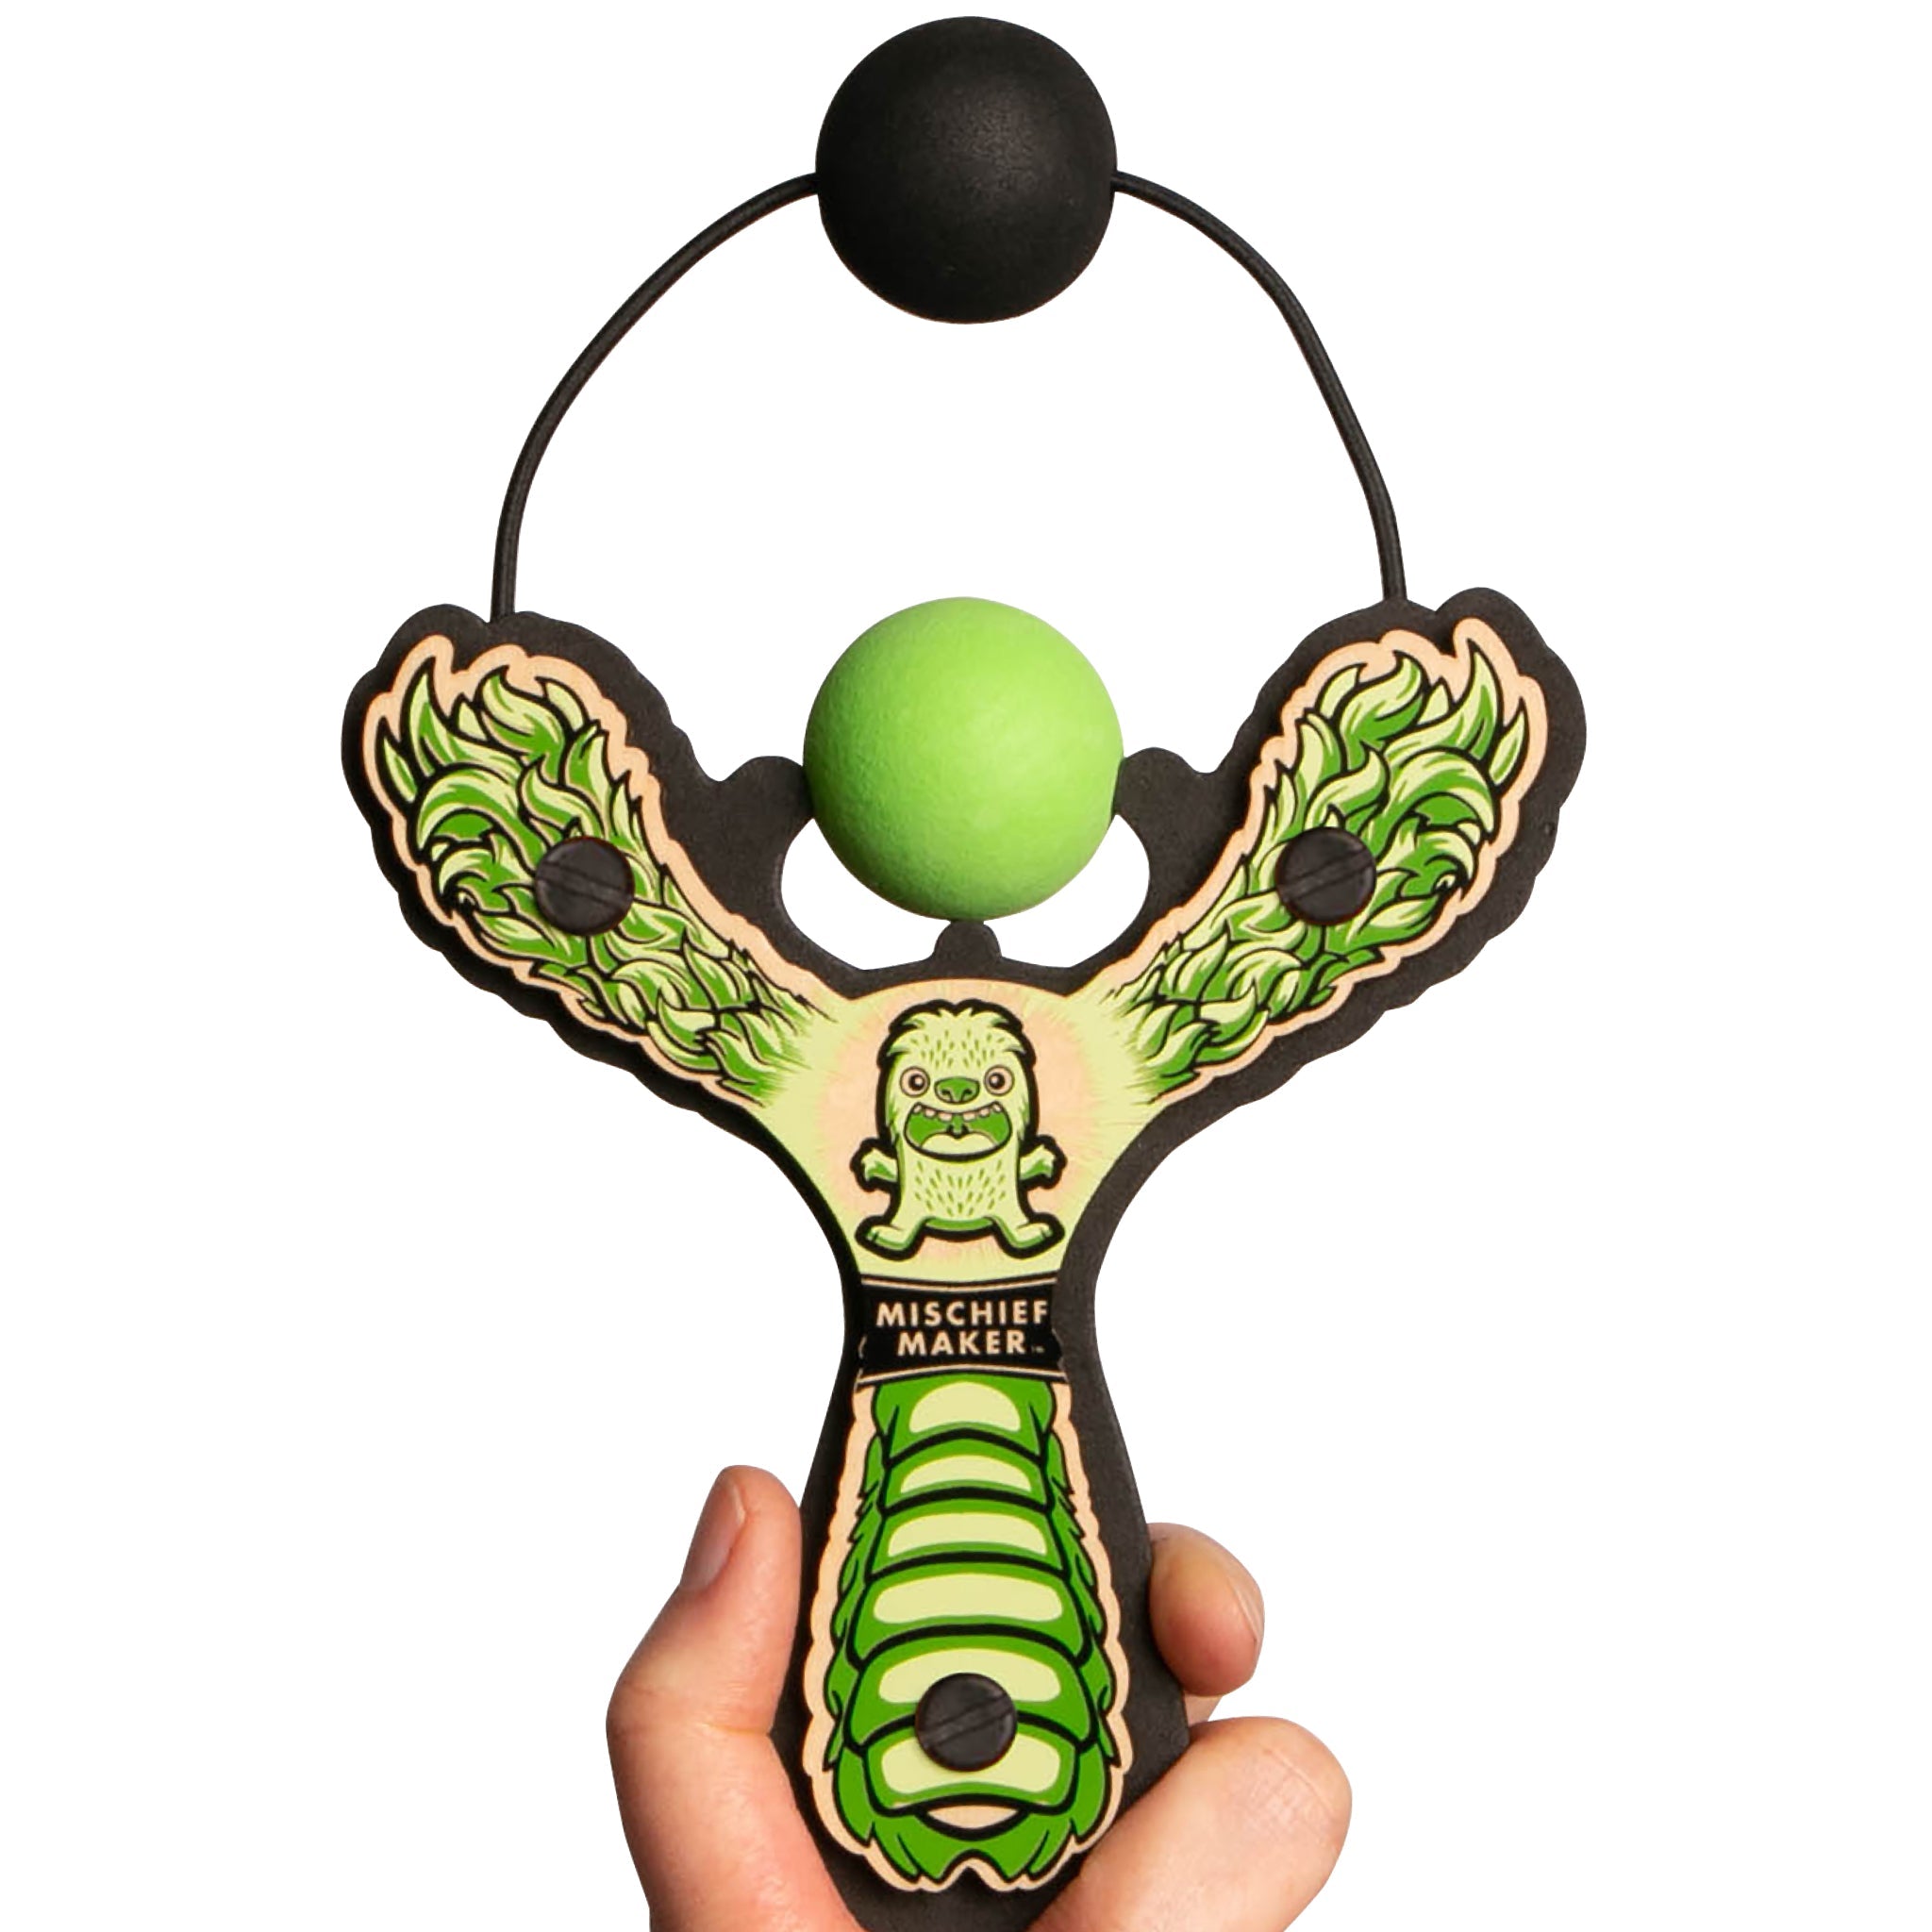 Green Monster toy slingshot hand held with ball foam ball. Mischief Maker by Mighty Fun!